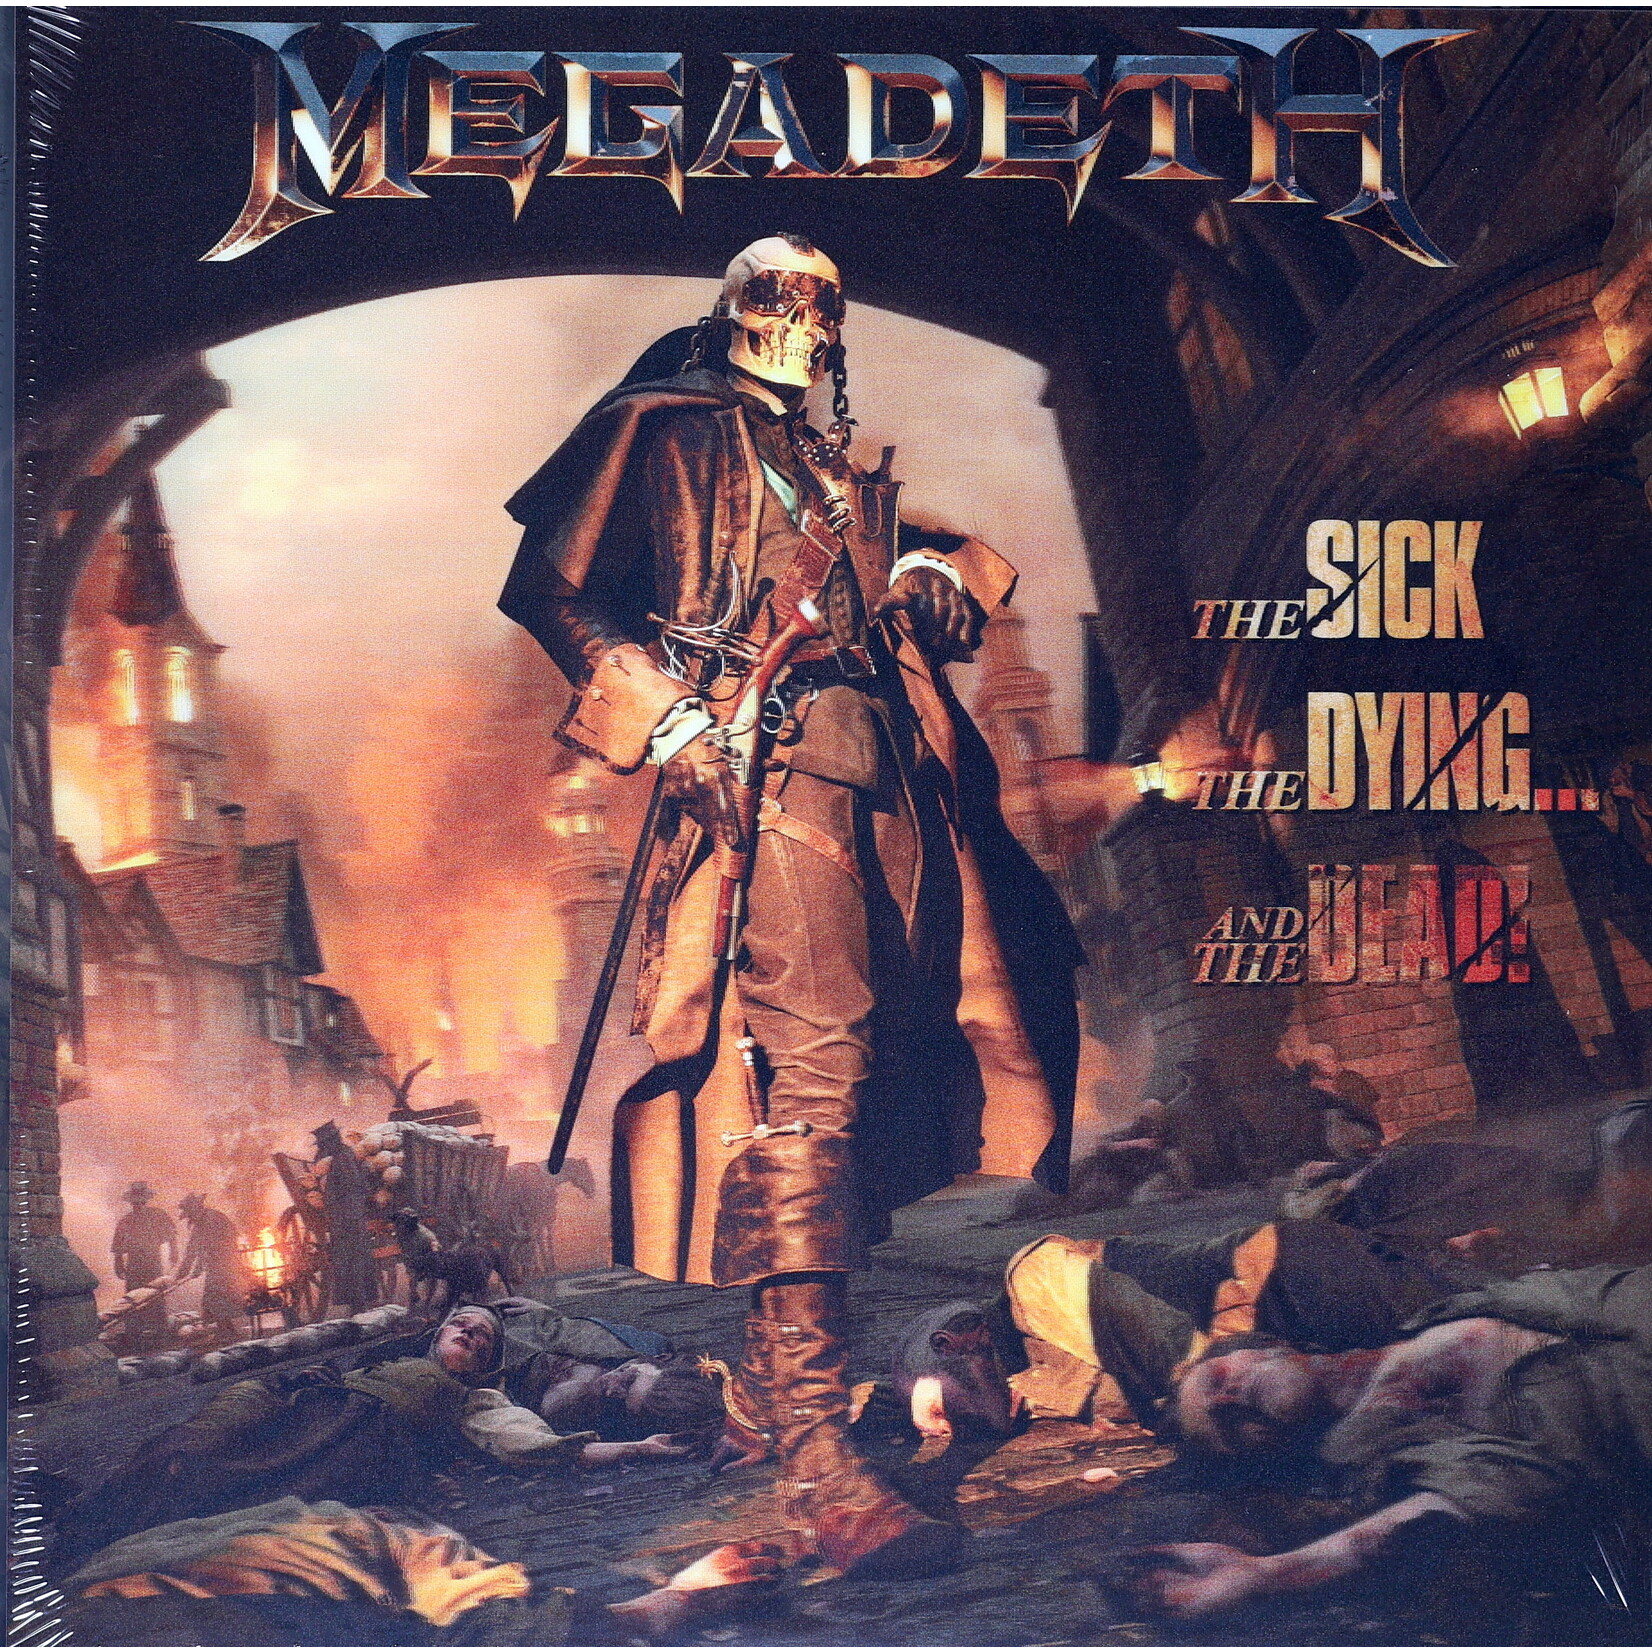 MEGADETH - SICK, THE DYING... AND THE DEAD! - LTD GATEFOLD 3LP